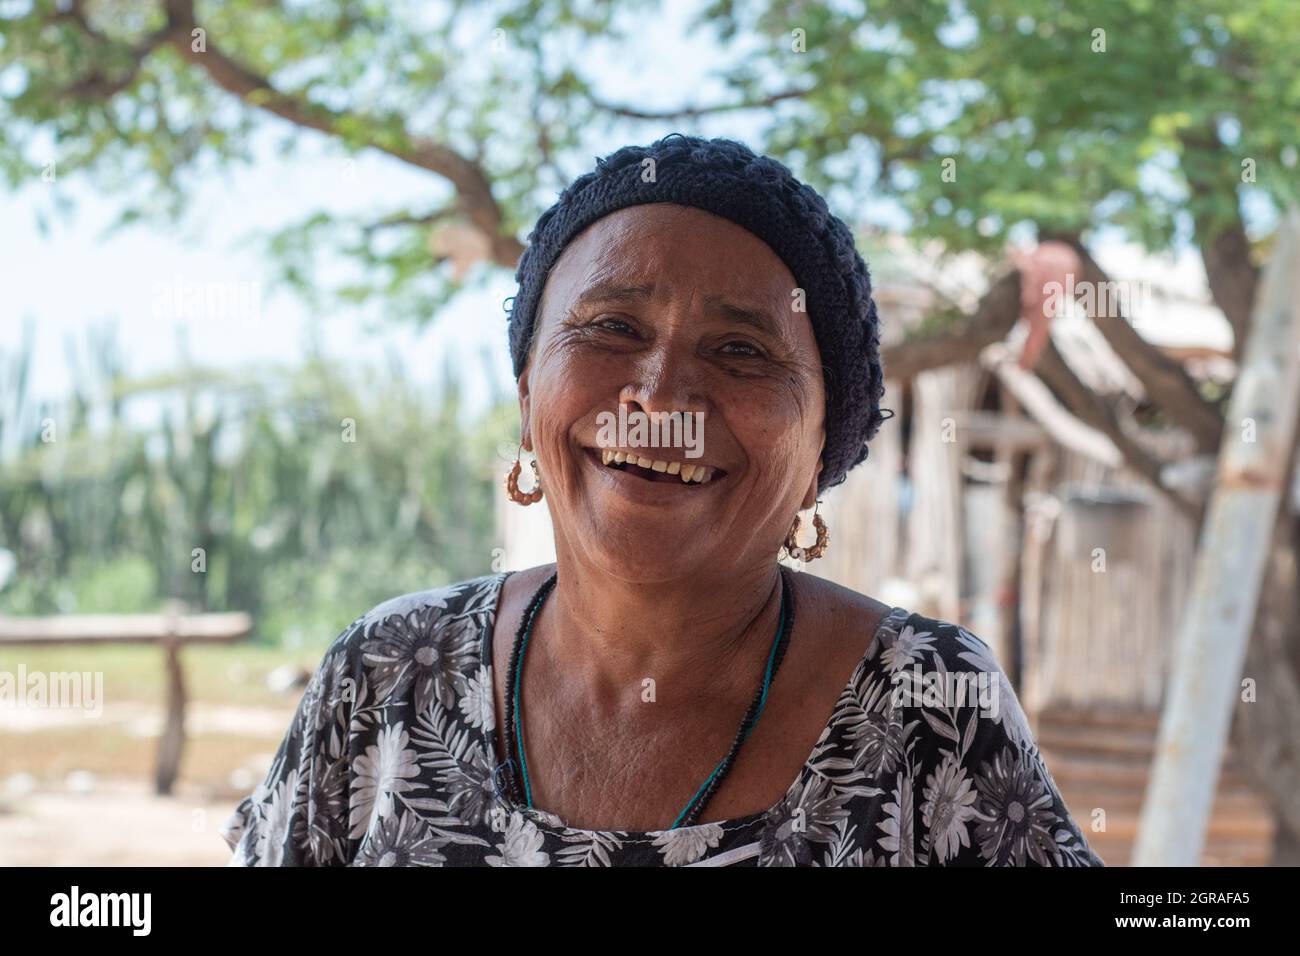 Mayapo, Colombia. 26th Sep, 2021. A Wayuu indigenous women poses for a portrait smiling during a Humanitarian Mission developed by 'De Corazon Guajira' in Mayapo at La Guajira - Colombia were they visited the Wayuu indigenous communities 'Pactalia, Poromana, Perrohuila' on September 26, 2021. The Guajira region in Colombia is the poorest region in Colombia, with its people commongly living without drinkable water, electricity and food. Credit: Long Visual Press/Alamy Live News Stock Photo